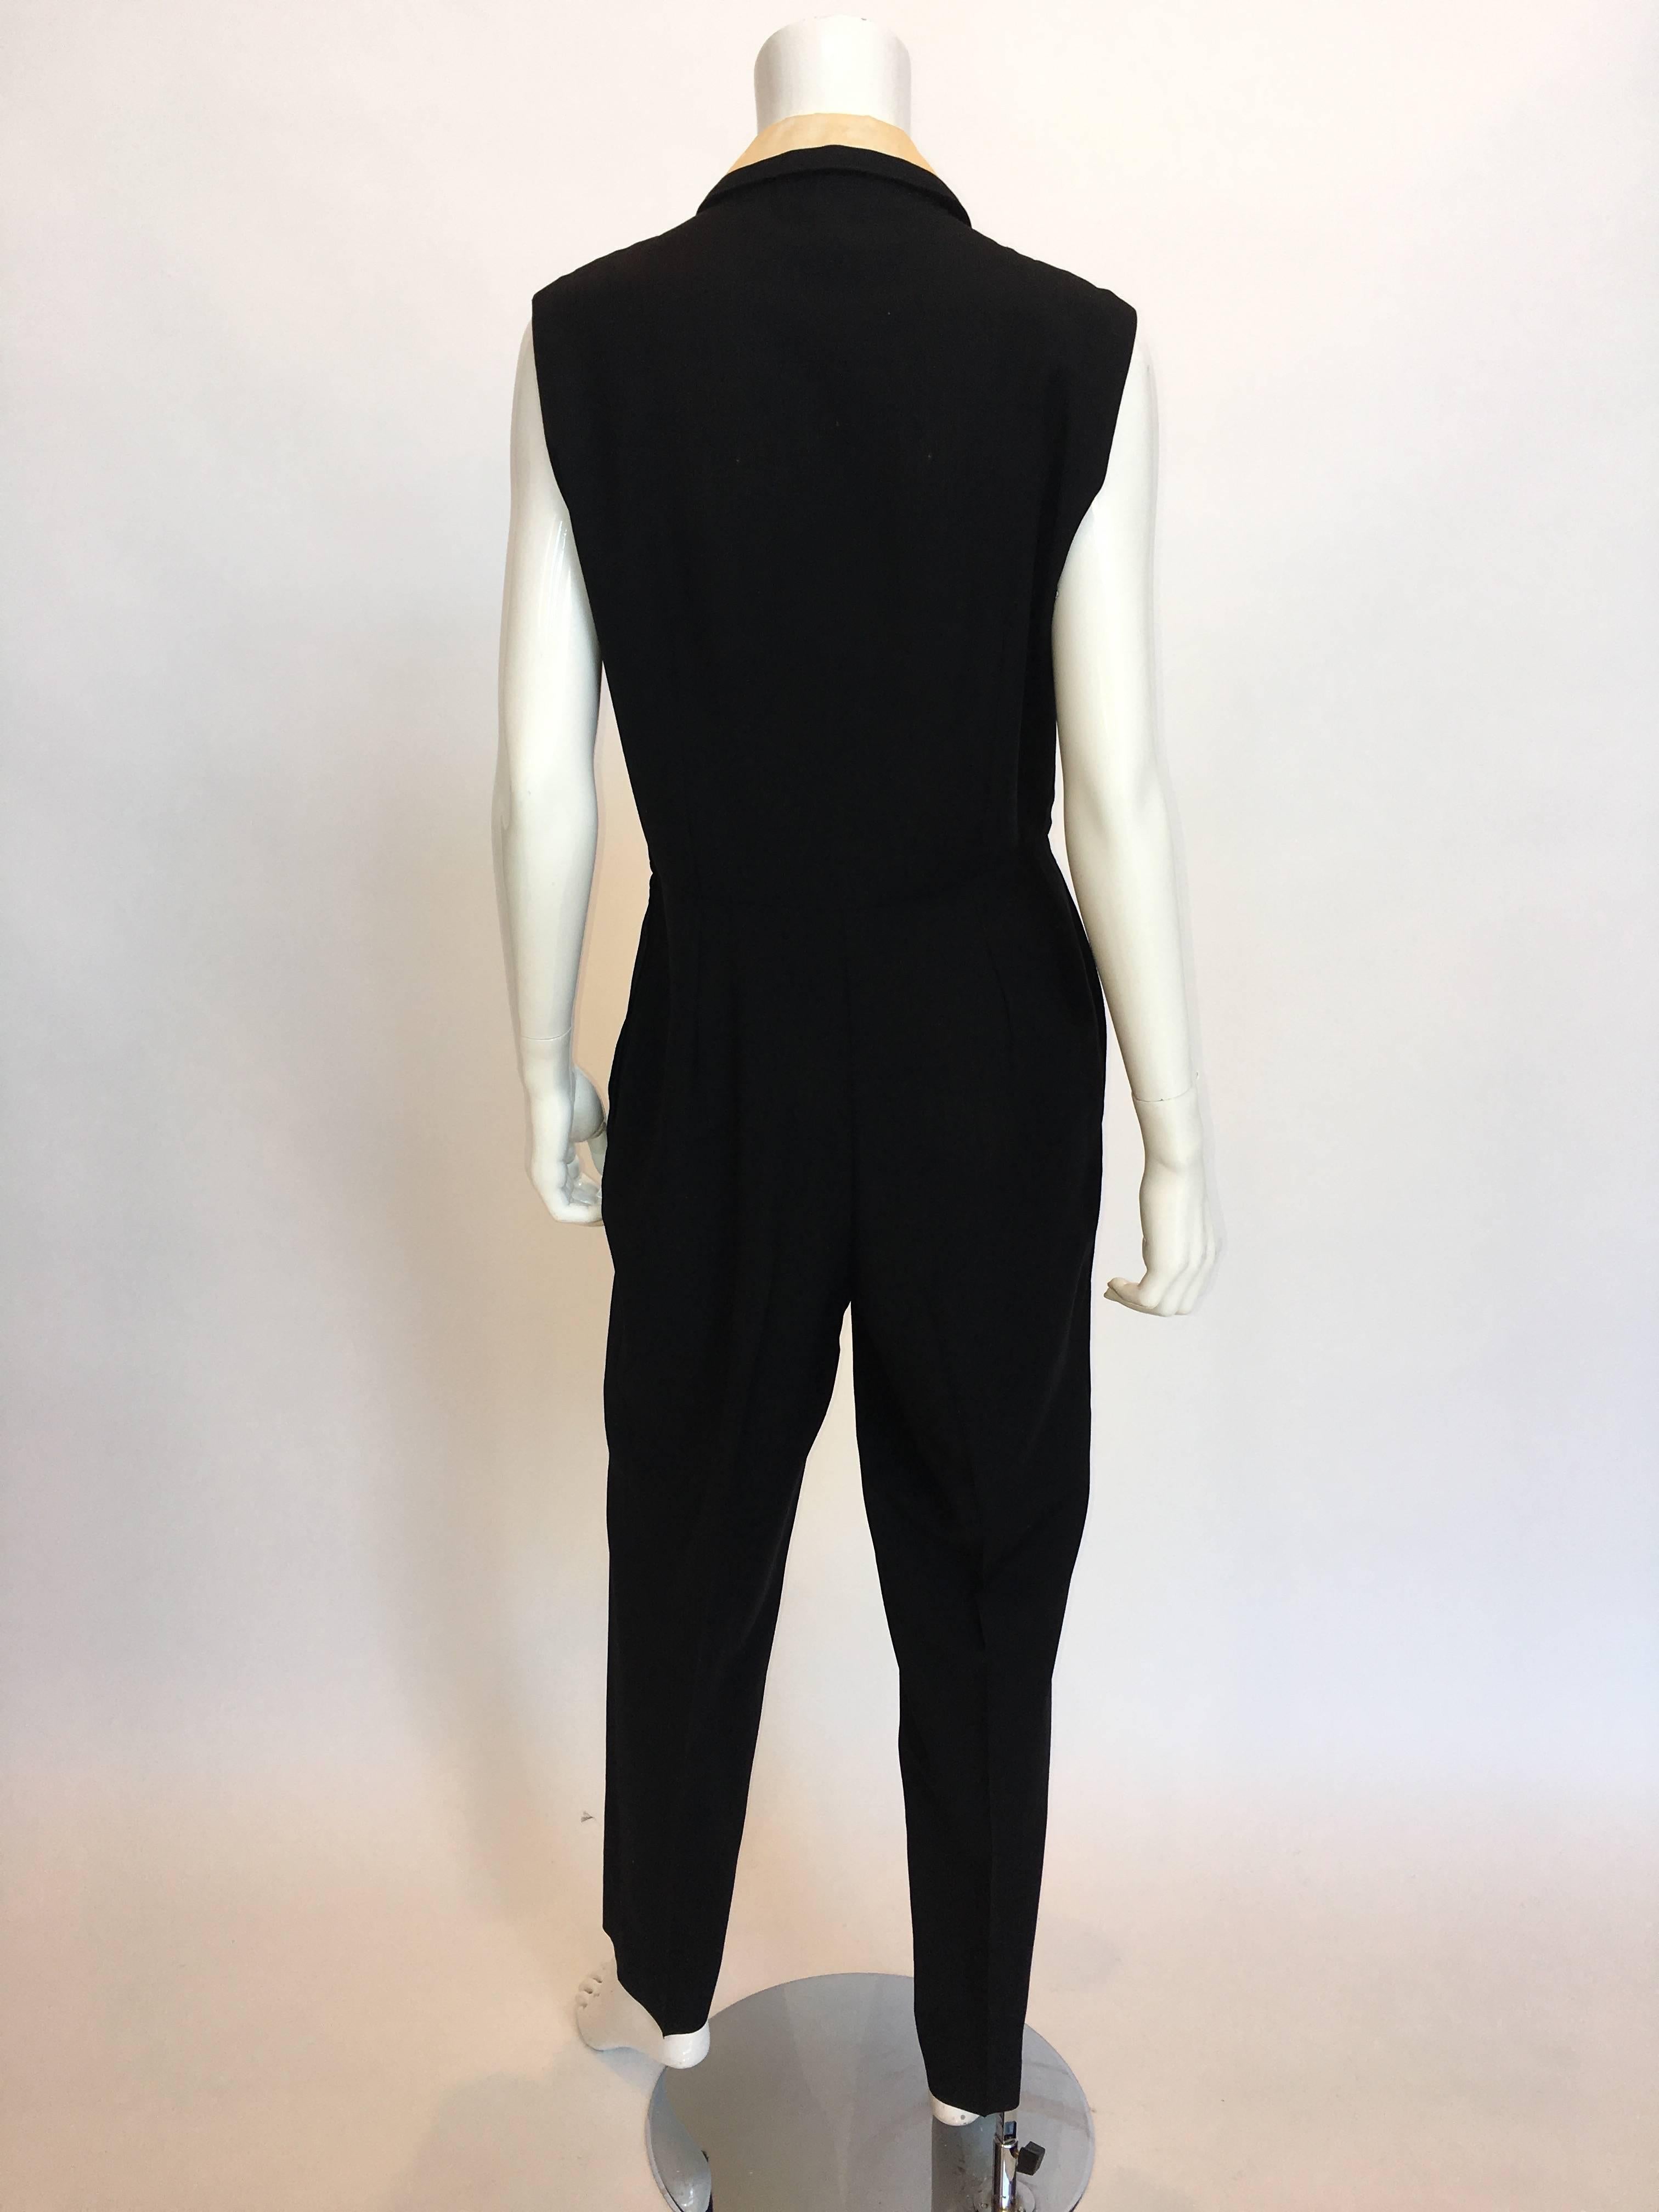 Women's or Men's Gianni Versace Couture 1980's Jumpsuit For Sale